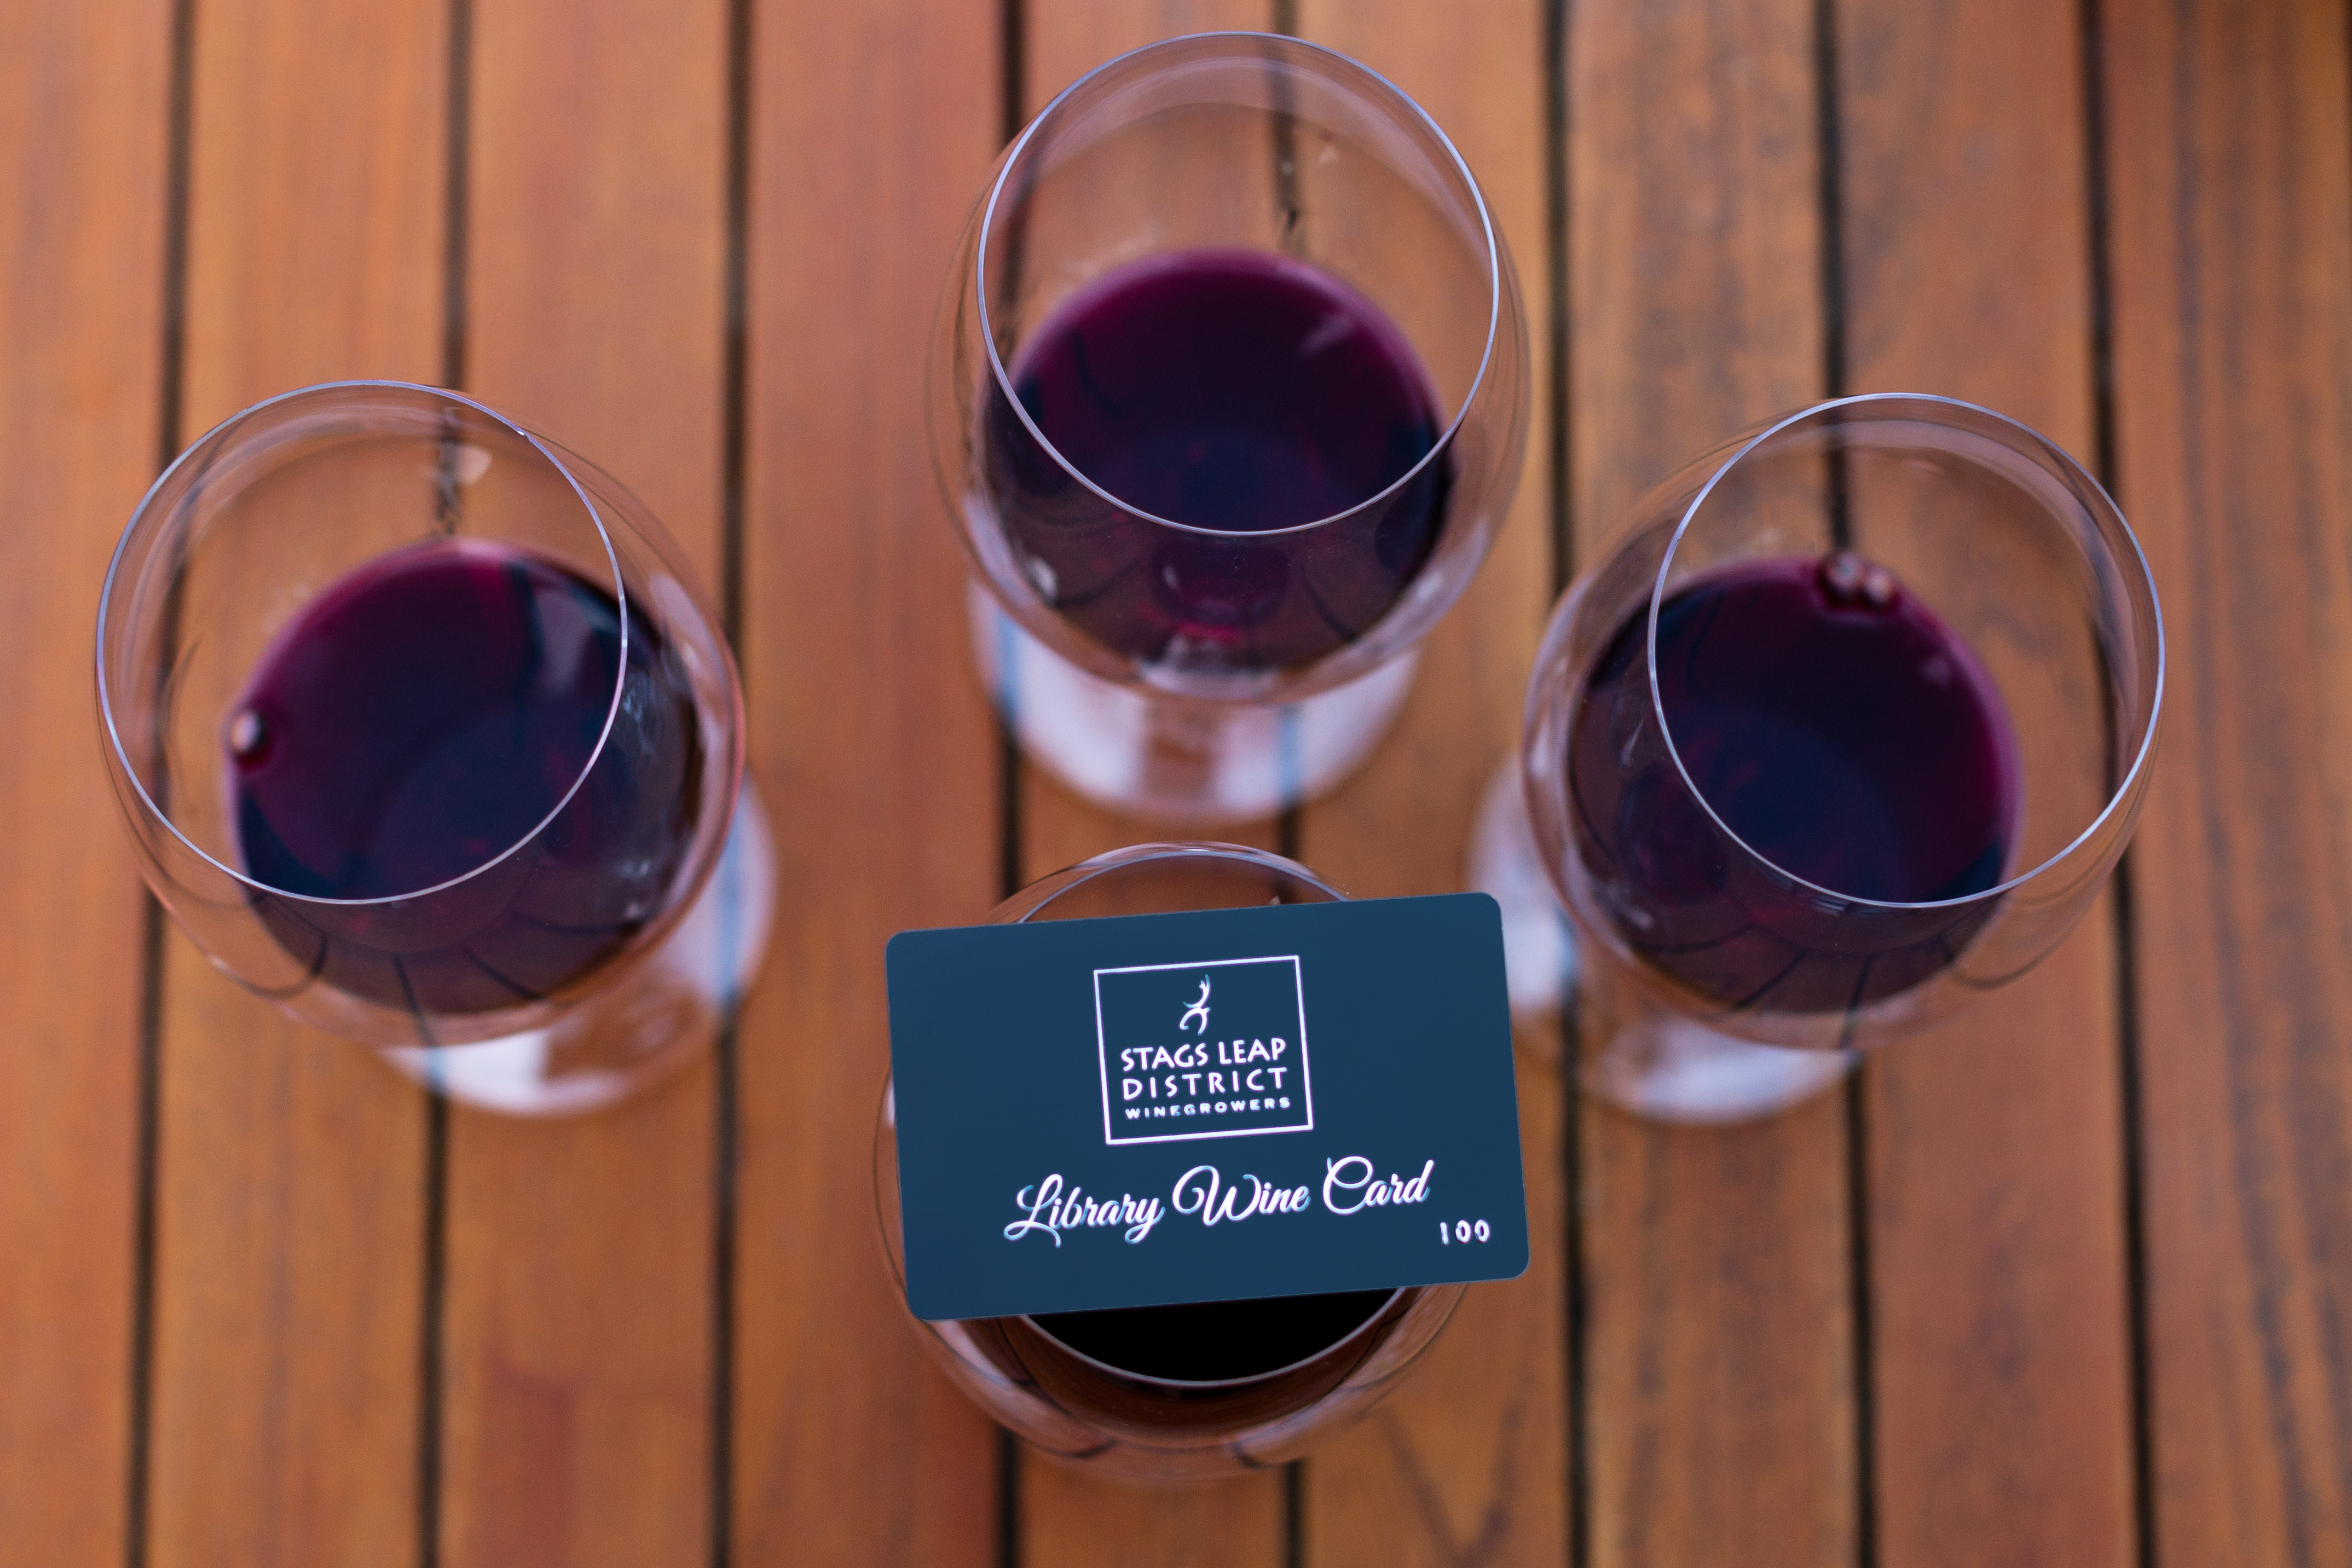 The cards can be used multiple times, and grant cardholders and up to three guests a special pour at 13 acclaimed Stags Leap District wineries.